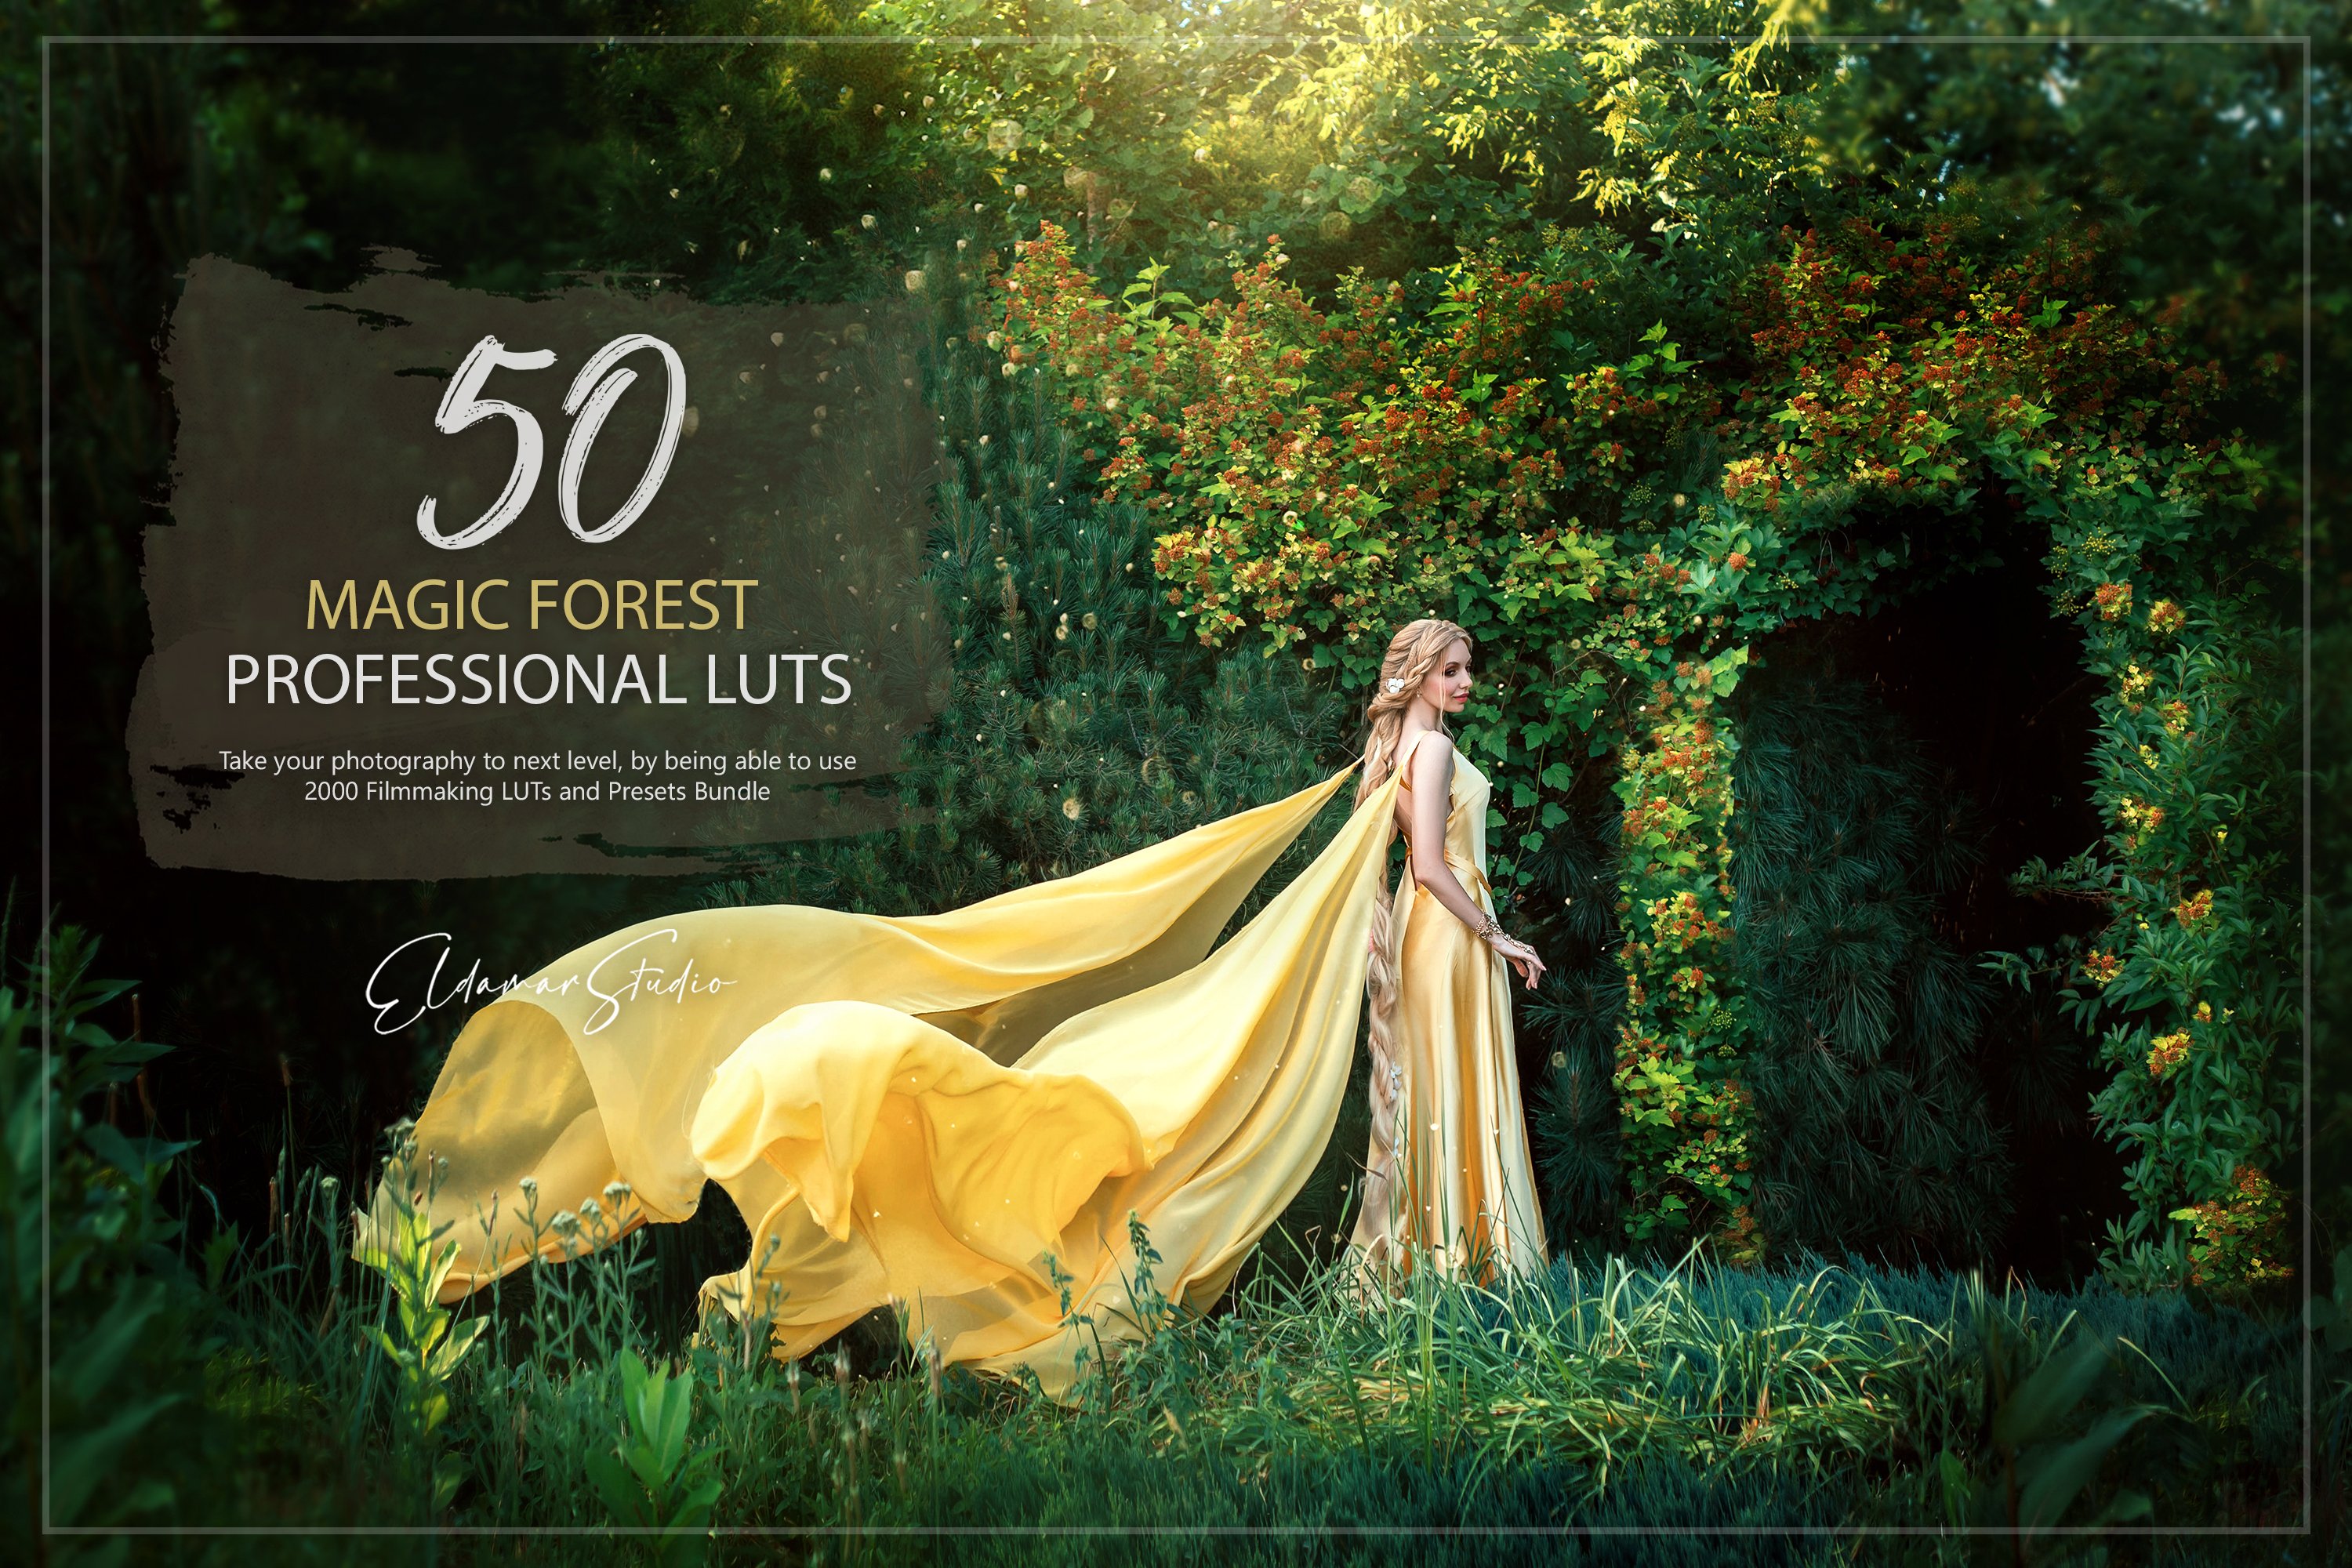 50Magic Forest LUTs and Presets Packcover image.